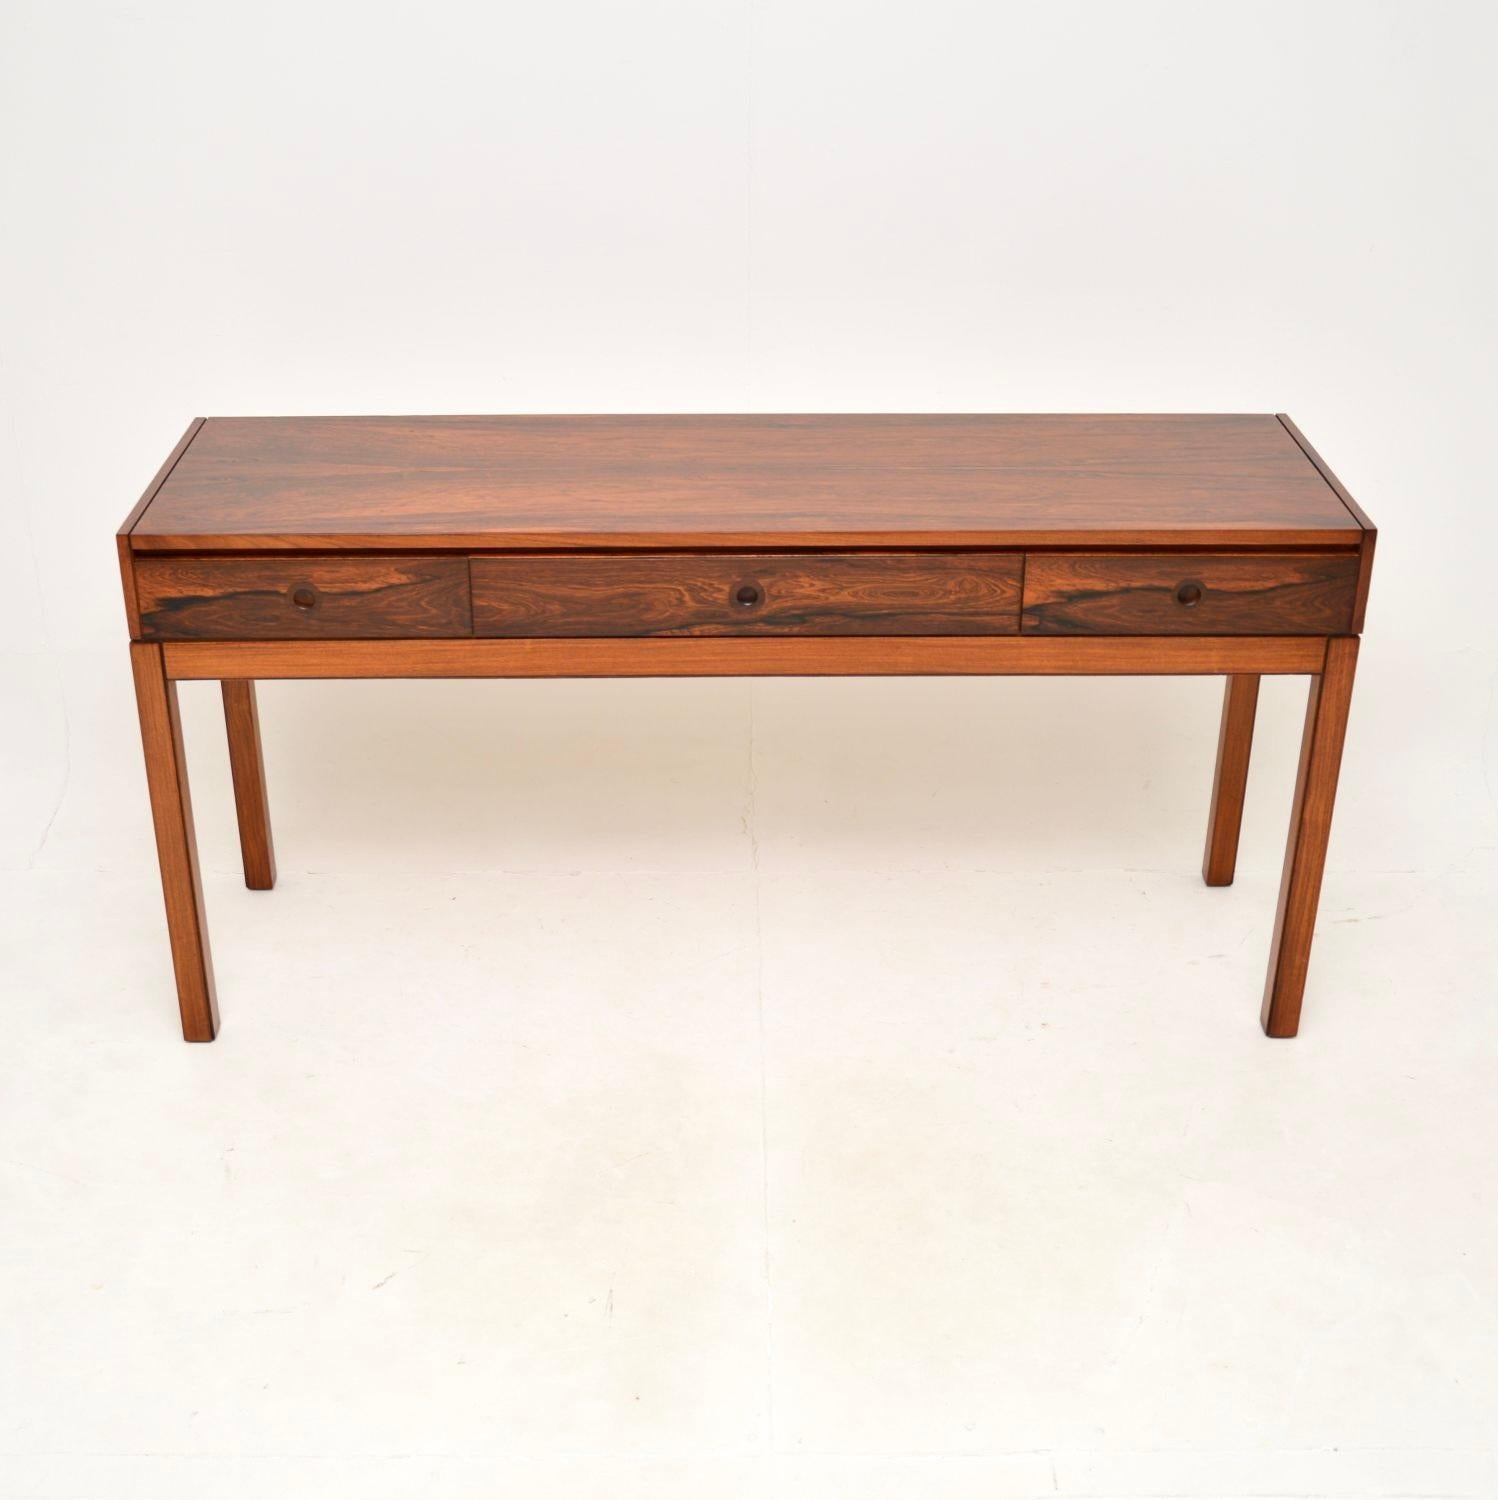 An exceedingly rare and impressive vintage console table by Robert Heritage for Archie Shine. This was made in England, it dates from the 1960’s.

The quality is outstanding as with all Archie Shine products, this may have been a one off custom